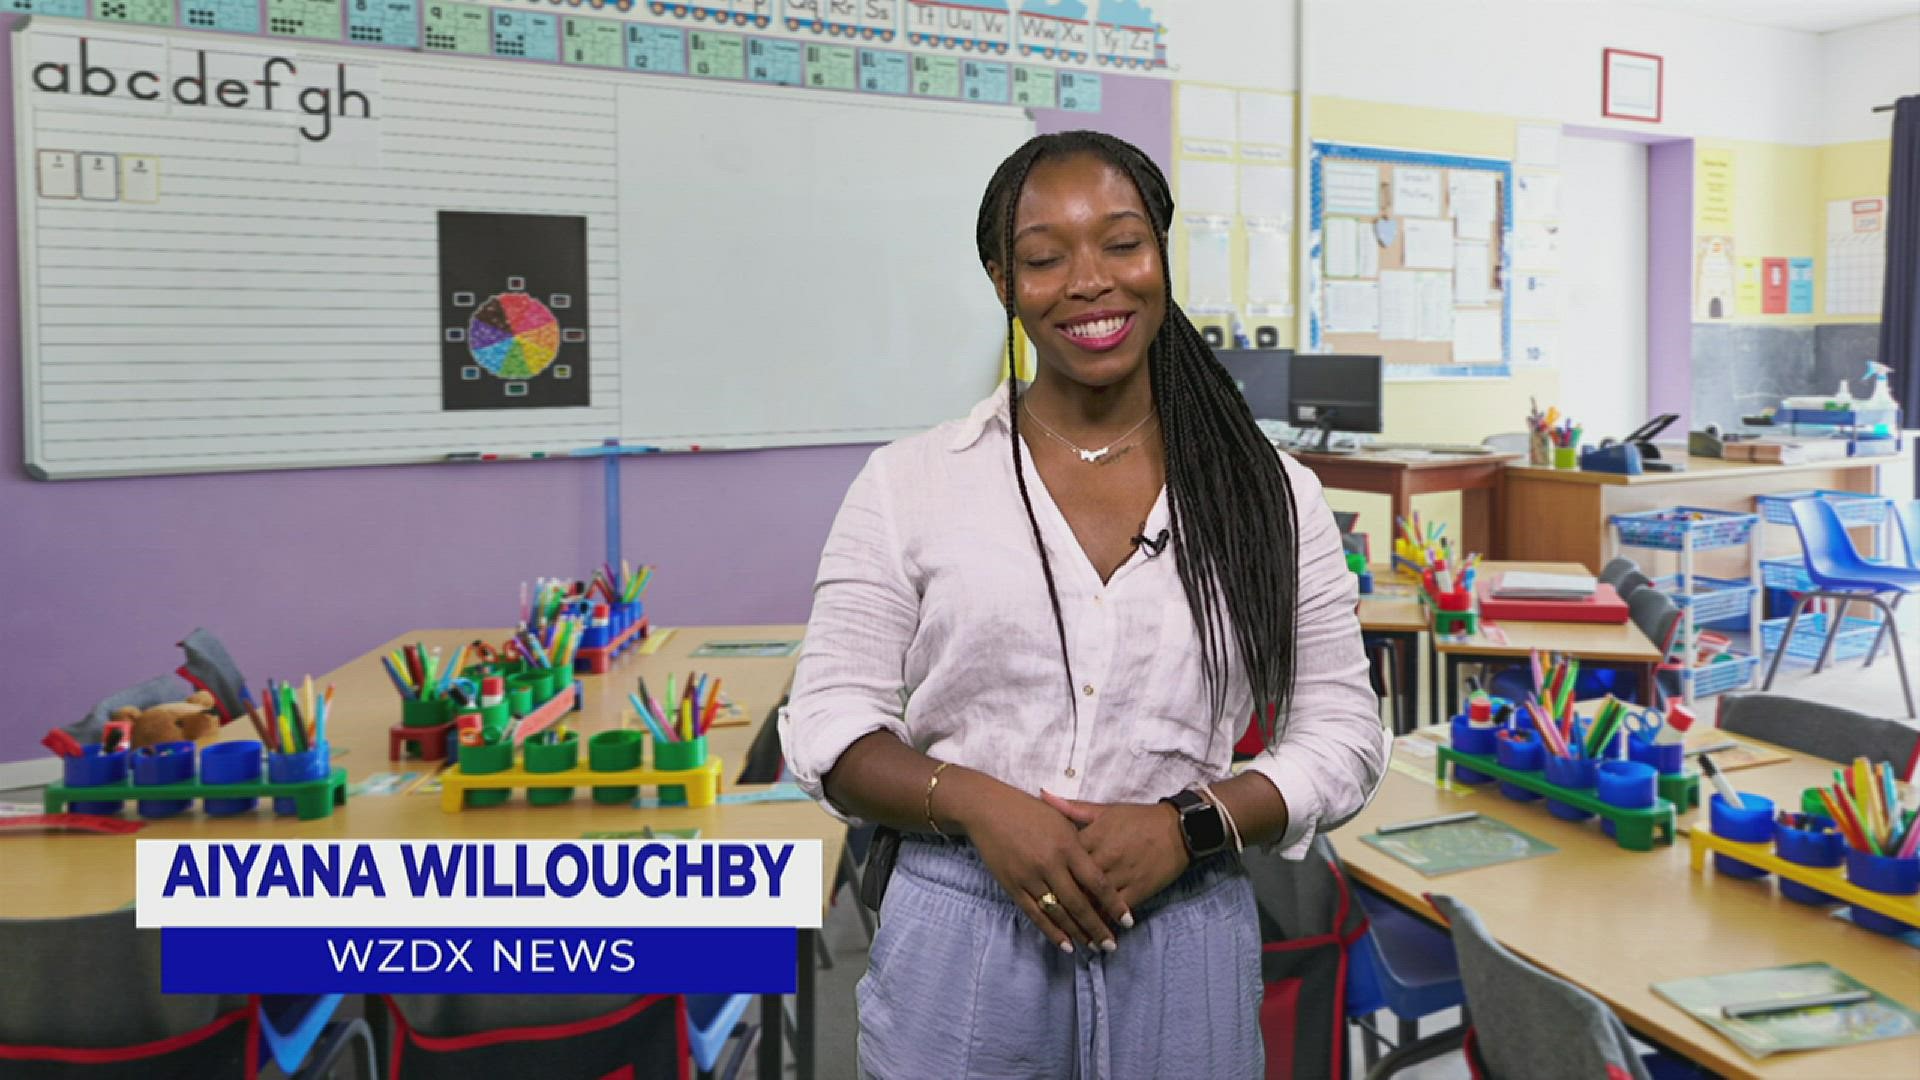 Tell us about your favorite teacher and they could be featured on the WZDX News.